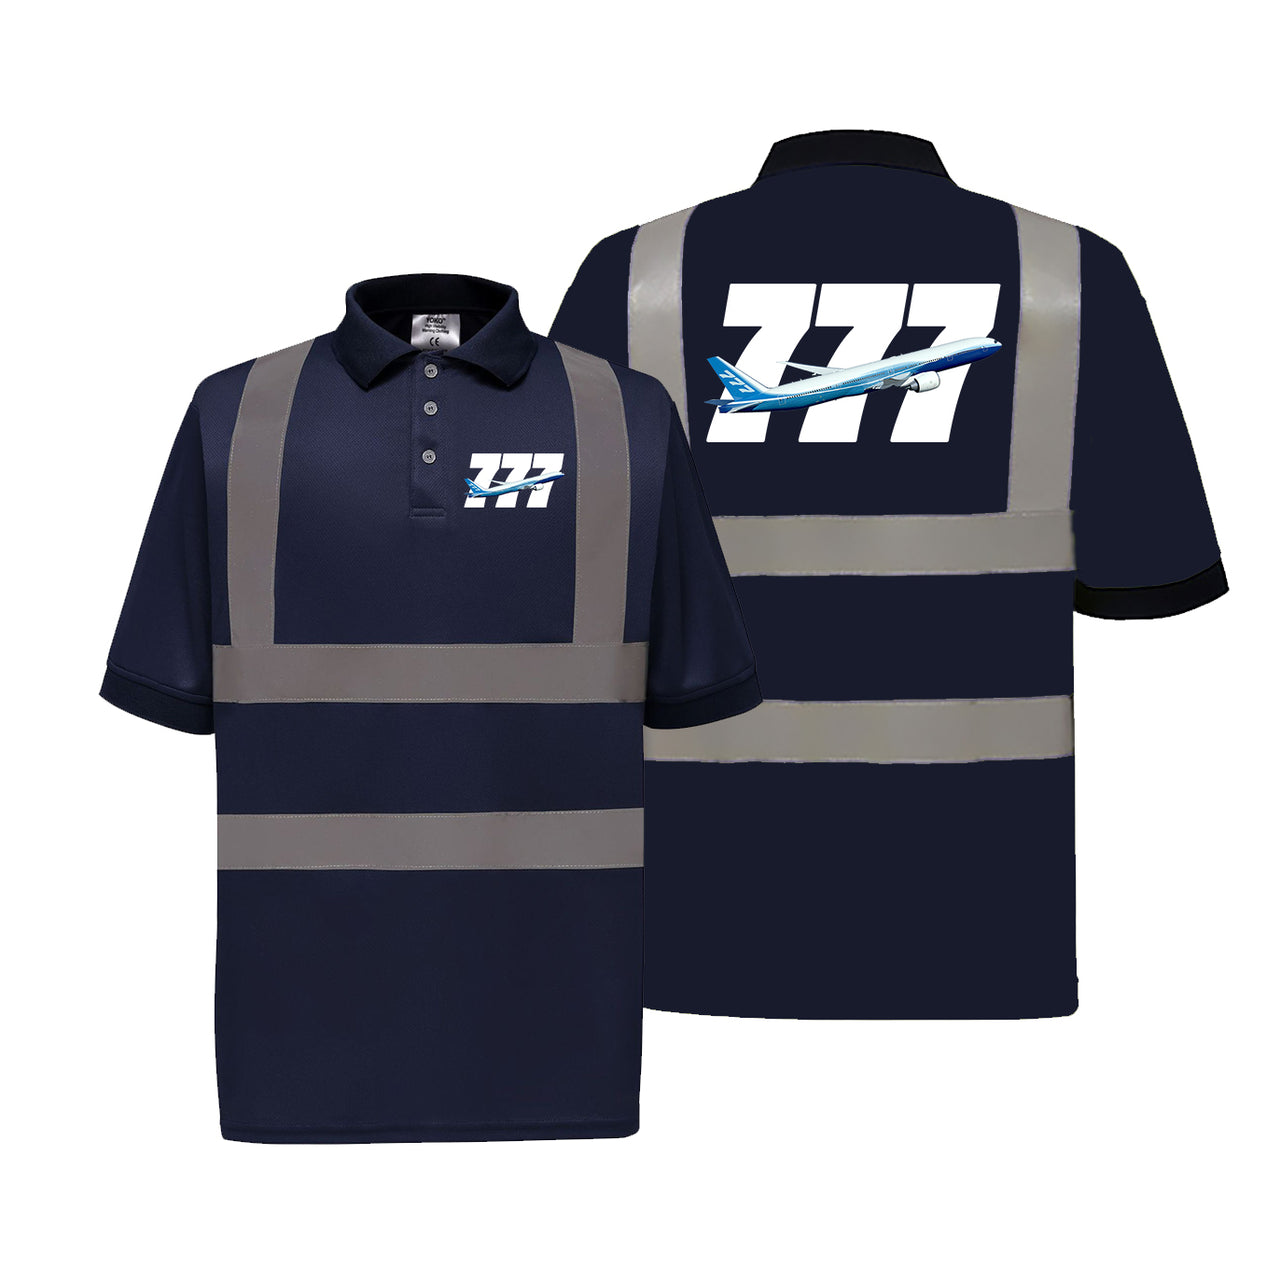 Super Boeing 777 Designed Reflective Polo T-Shirts